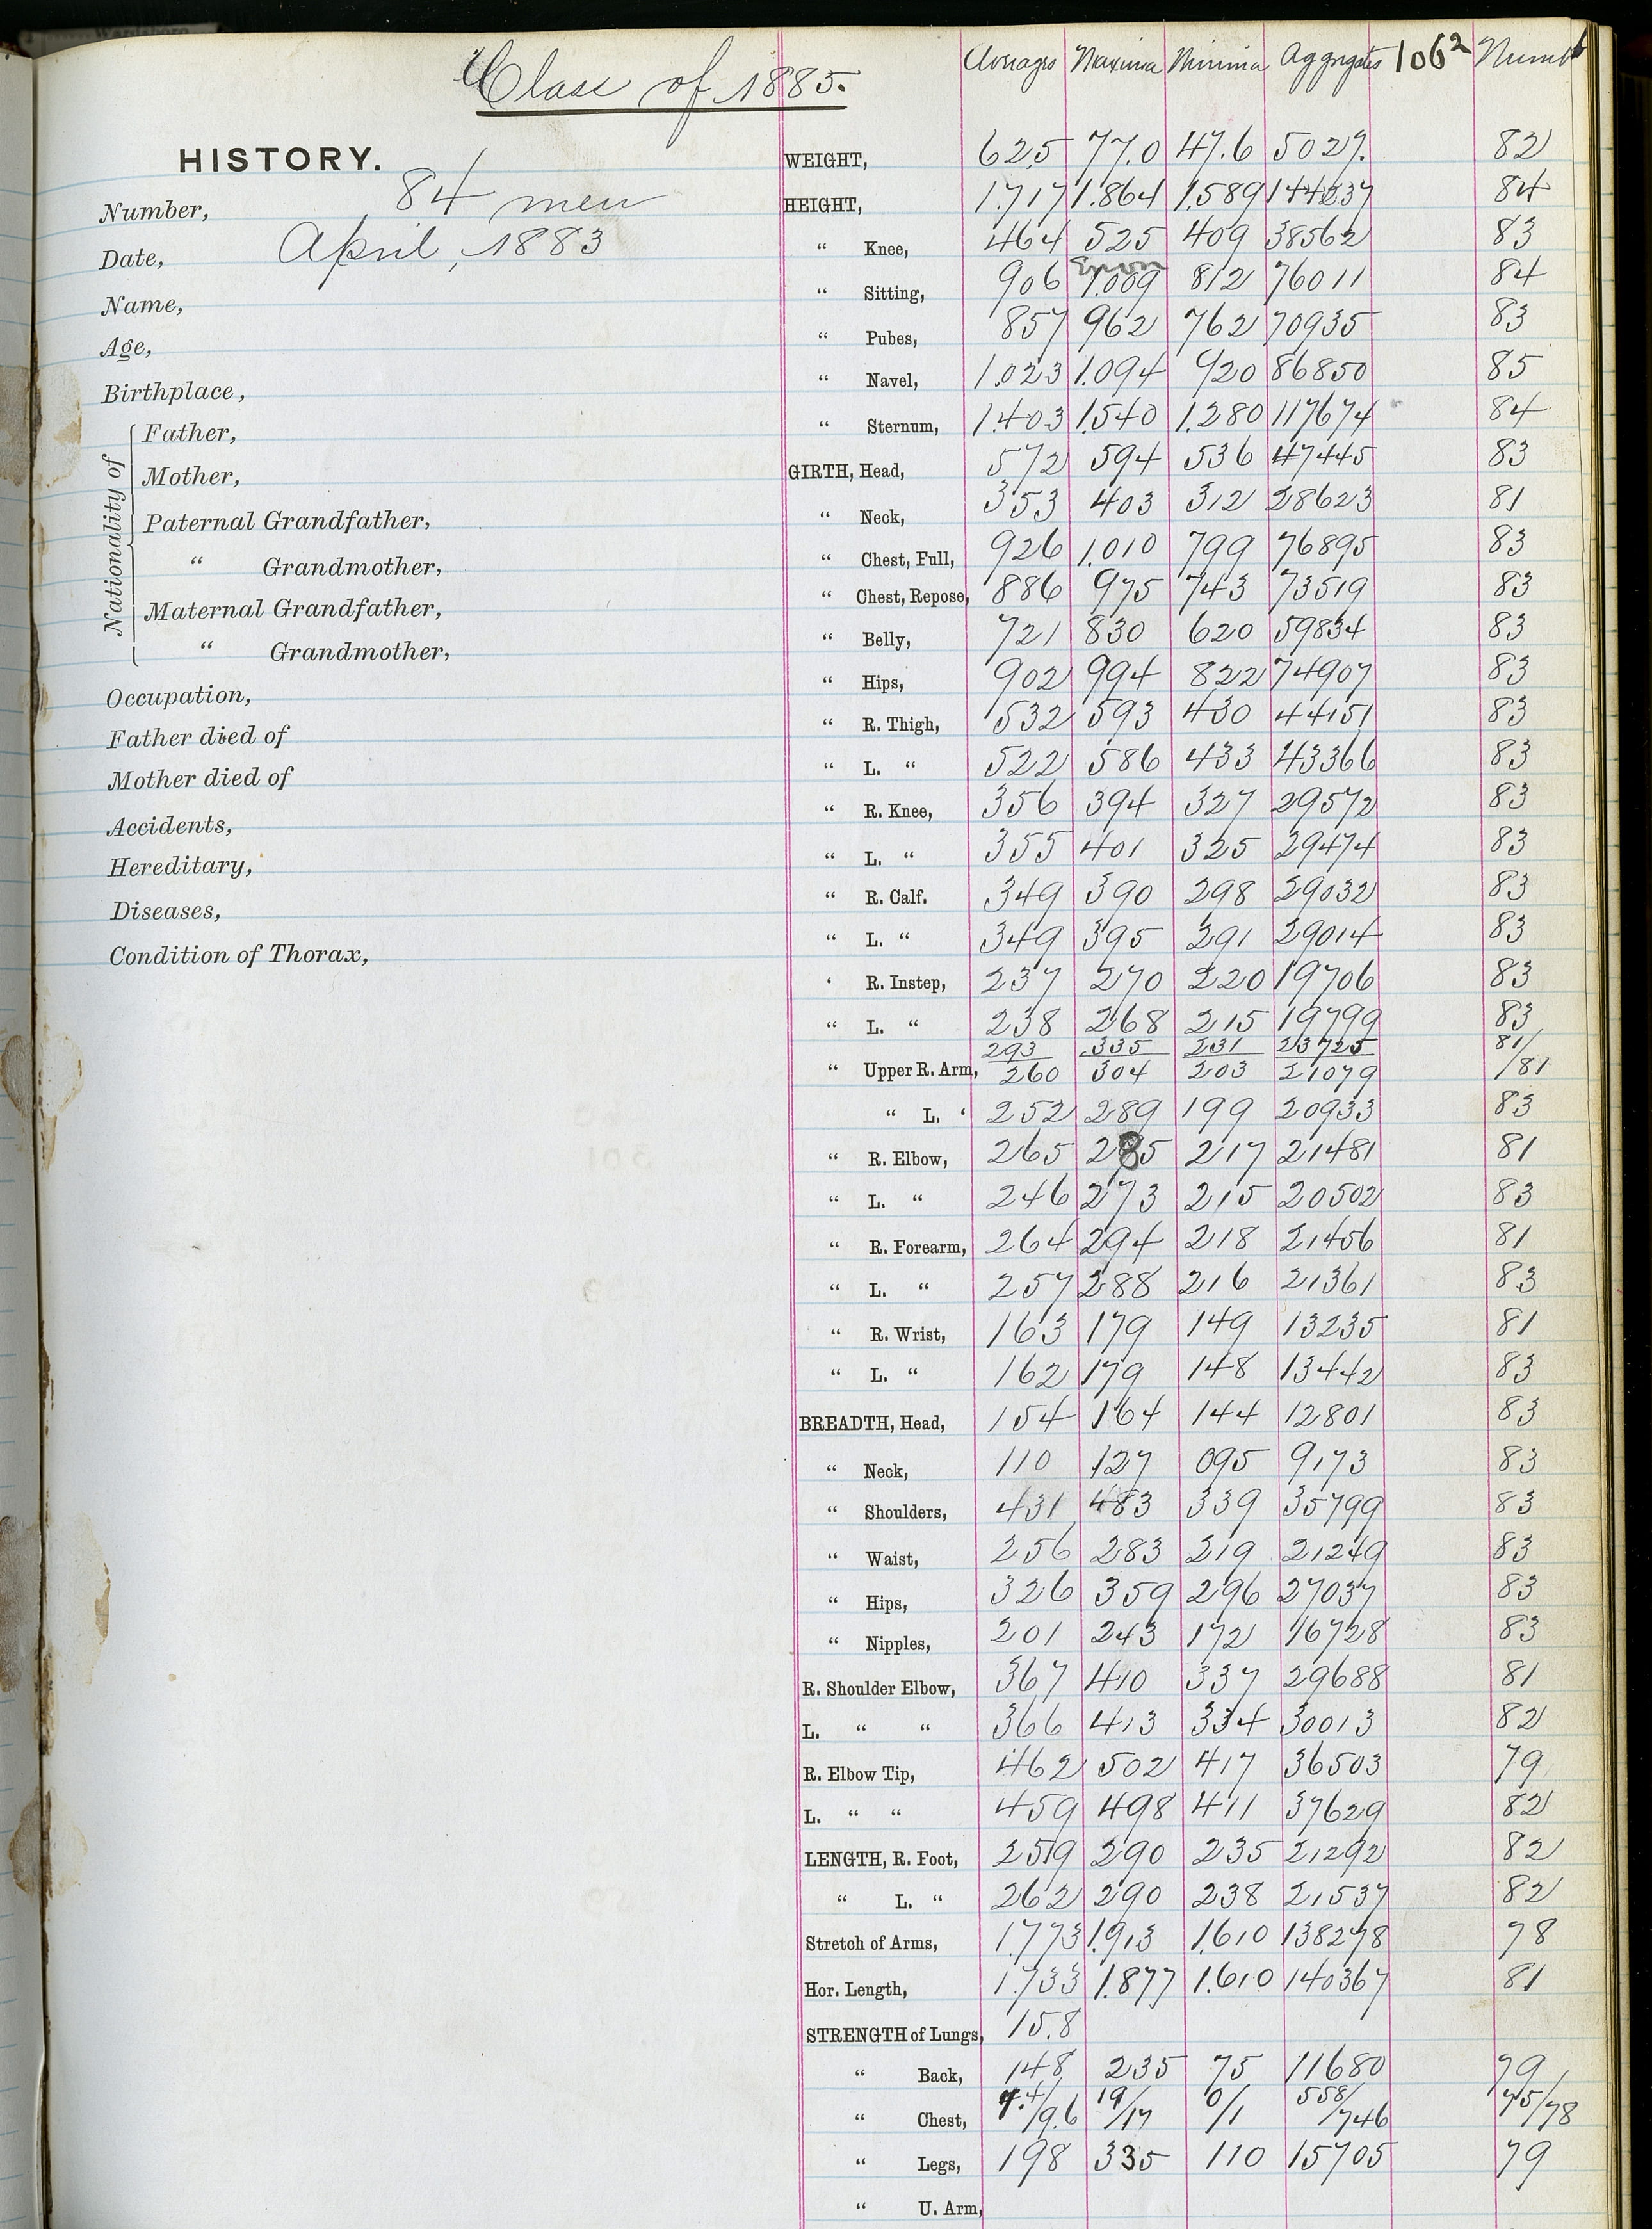 Page of a record volume showing the compiled physical measurements for the class of 1885